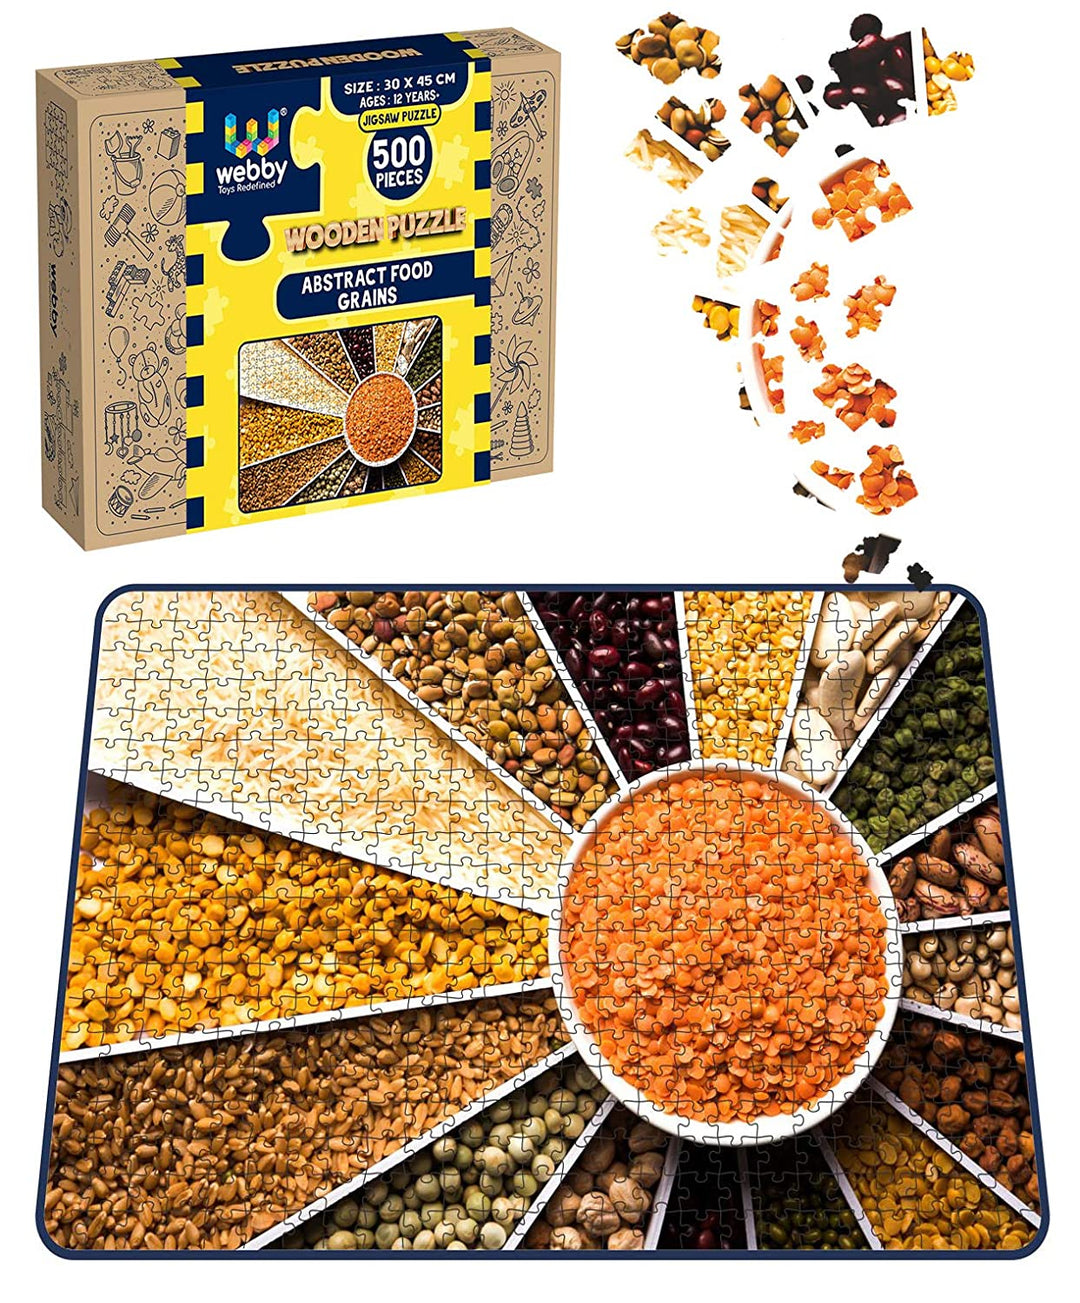 Webby Abstract Food Grains Wooden Jigsaw Puzzle, 500 pieces